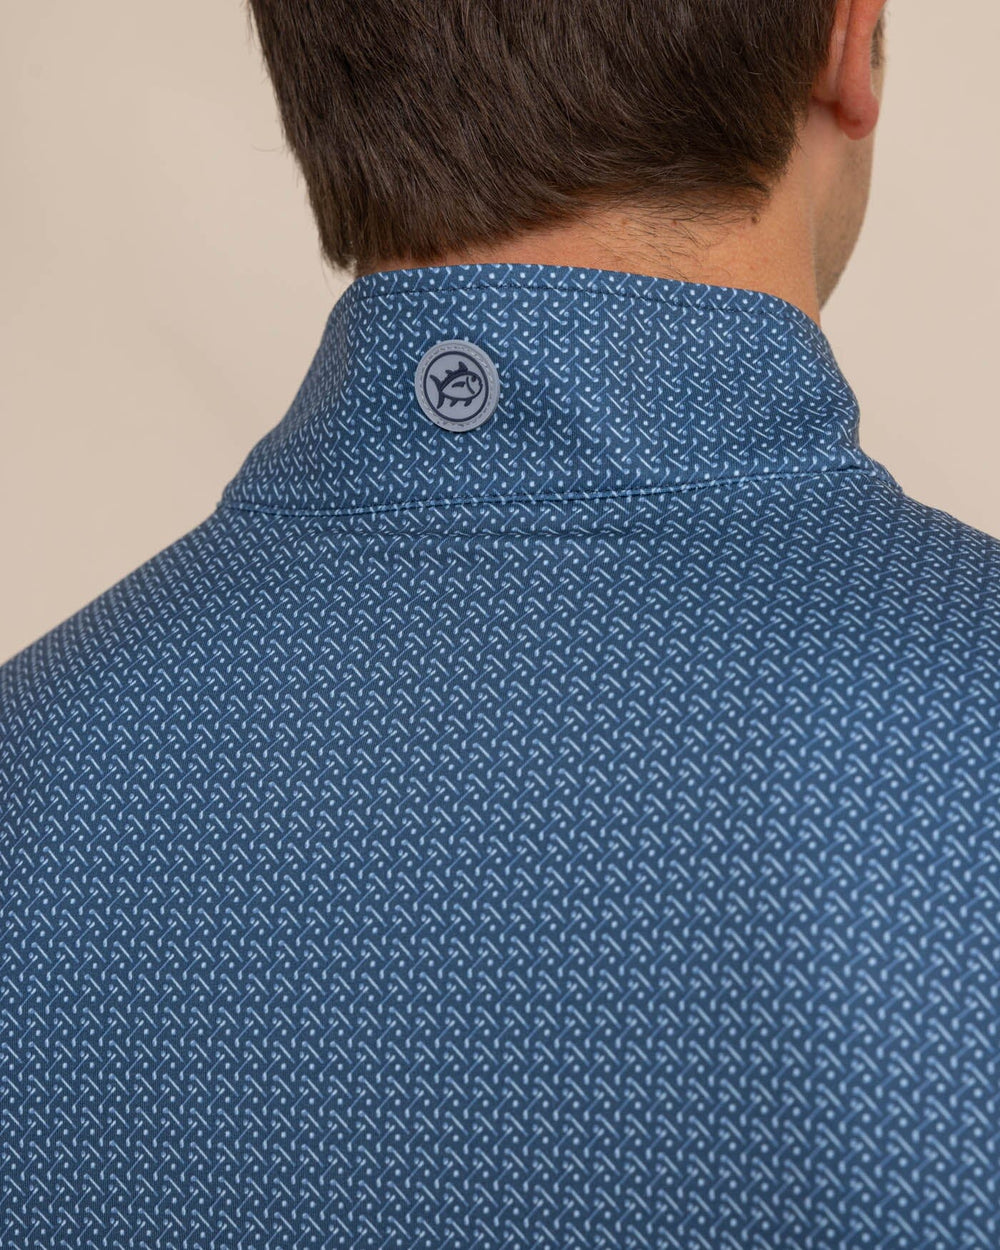 The detail view of the Southern Tide Clubbin It Print Cruiser Quarter Zip by Southern Tide - Aged Denim